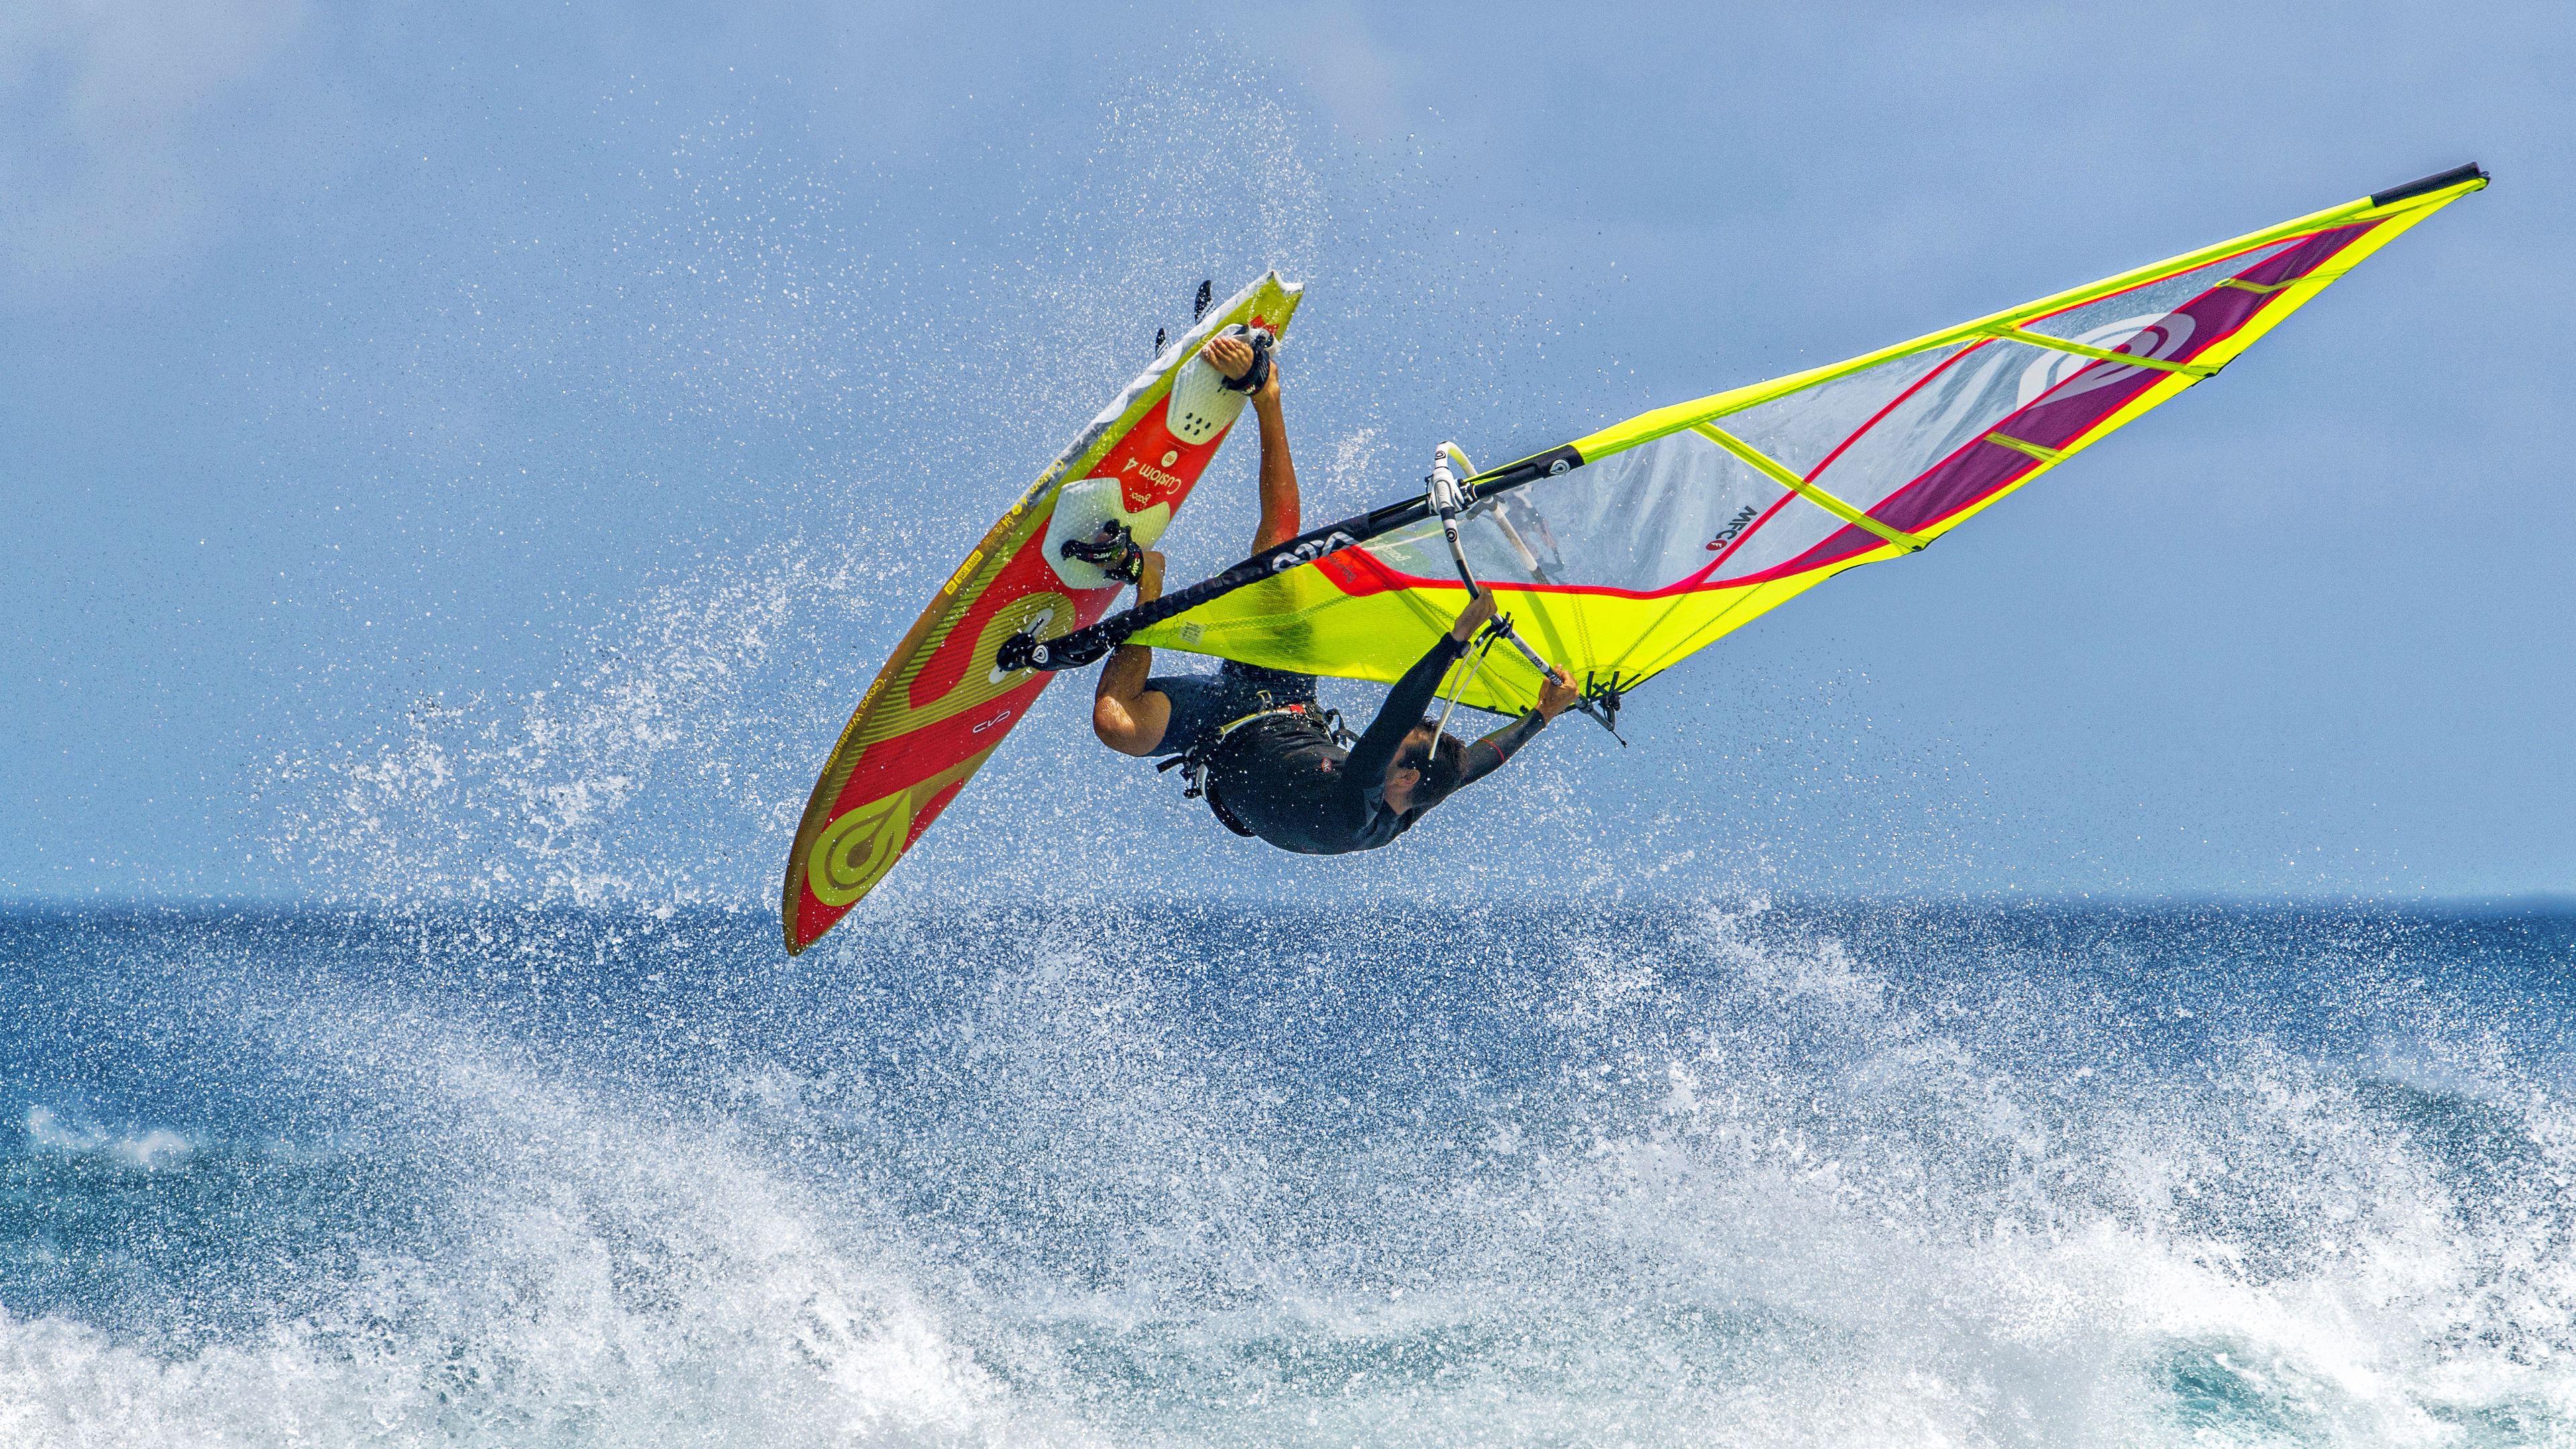 Windsurfing: World Surf League, Junior Surfing 2022, Competition Final Day, Windsurfing in Welle, Lower Saxony. 3840x2160 4K Wallpaper.